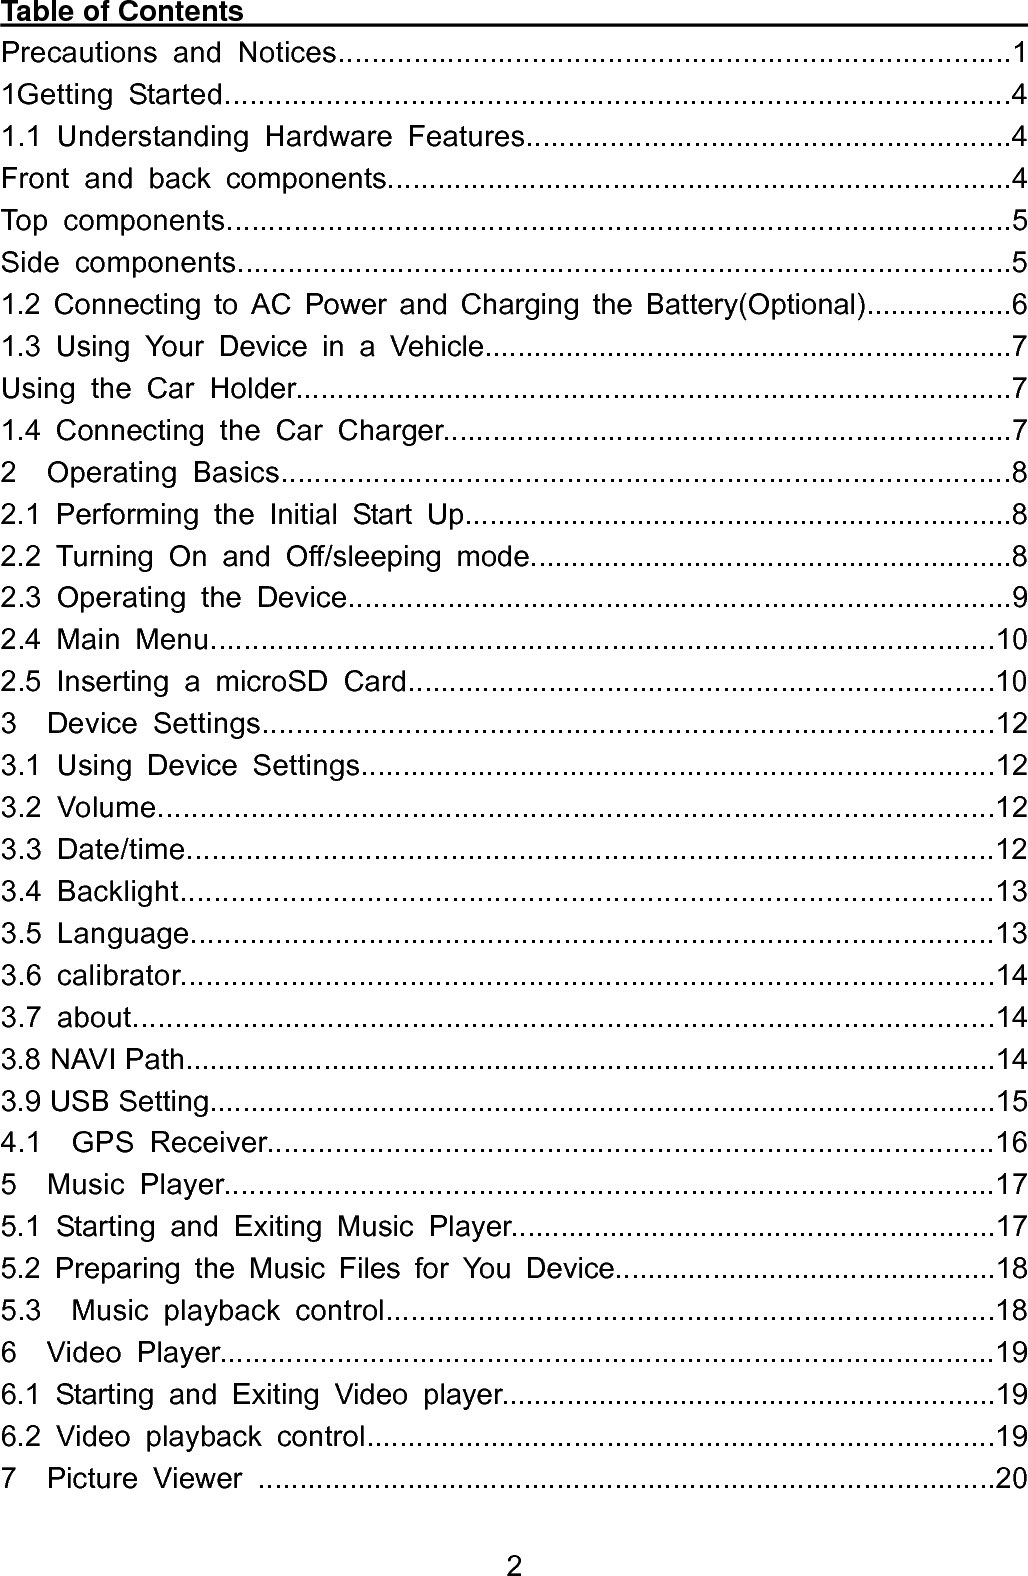  2Table of Contents                                                        Precautions and Notices................................................................................1 1Getting Started.............................................................................................4 1.1 Understanding Hardware Features..........................................................4 Front and back components...........................................................................4 Top components.............................................................................................5 Side components............................................................................................5 1.2 Connecting to AC Power and Charging the Battery(Optional)..................6 1.3 Using Your Device in a Vehicle.................................................................7 Using the Car Holder......................................................................................7 1.4 Connecting the Car Charger.....................................................................7 2  Operating Basics.......................................................................................8 2.1 Performing the Initial Start Up...................................................................8 2.2 Turning On and Off/sleeping mode...........................................................8 2.3 Operating the Device................................................................................9 2.4 Main Menu..............................................................................................10 2.5 Inserting a microSD Card.......................................................................10 3  Device Settings.......................................................................................12 3.1 Using Device Settings............................................................................12 3.2 Volume...................................................................................................12        3.3 Date/time...............................................................................................12 3.4 Backlight................................................................................................13 3.5 Language...............................................................................................13 3.6 calibrator................................................................................................14 3.7 about......................................................................................................14 3.8 NAVI Path....................................................................................................14 3.9 USB Setting.................................................................................................15 4.1  GPS Receiver......................................................................................16 5  Music Player...........................................................................................17 5.1 Starting and Exiting Music Player...........................................................17 5.2 Preparing the Music Files for You Device...............................................18 5.3  Music playback control.........................................................................18 6  Video Player.............................................................................................19 6.1 Starting and Exiting Video player.............................................................19 6.2 Video playback control............................................................................19 7  Picture Viewer .........................................................................................20 